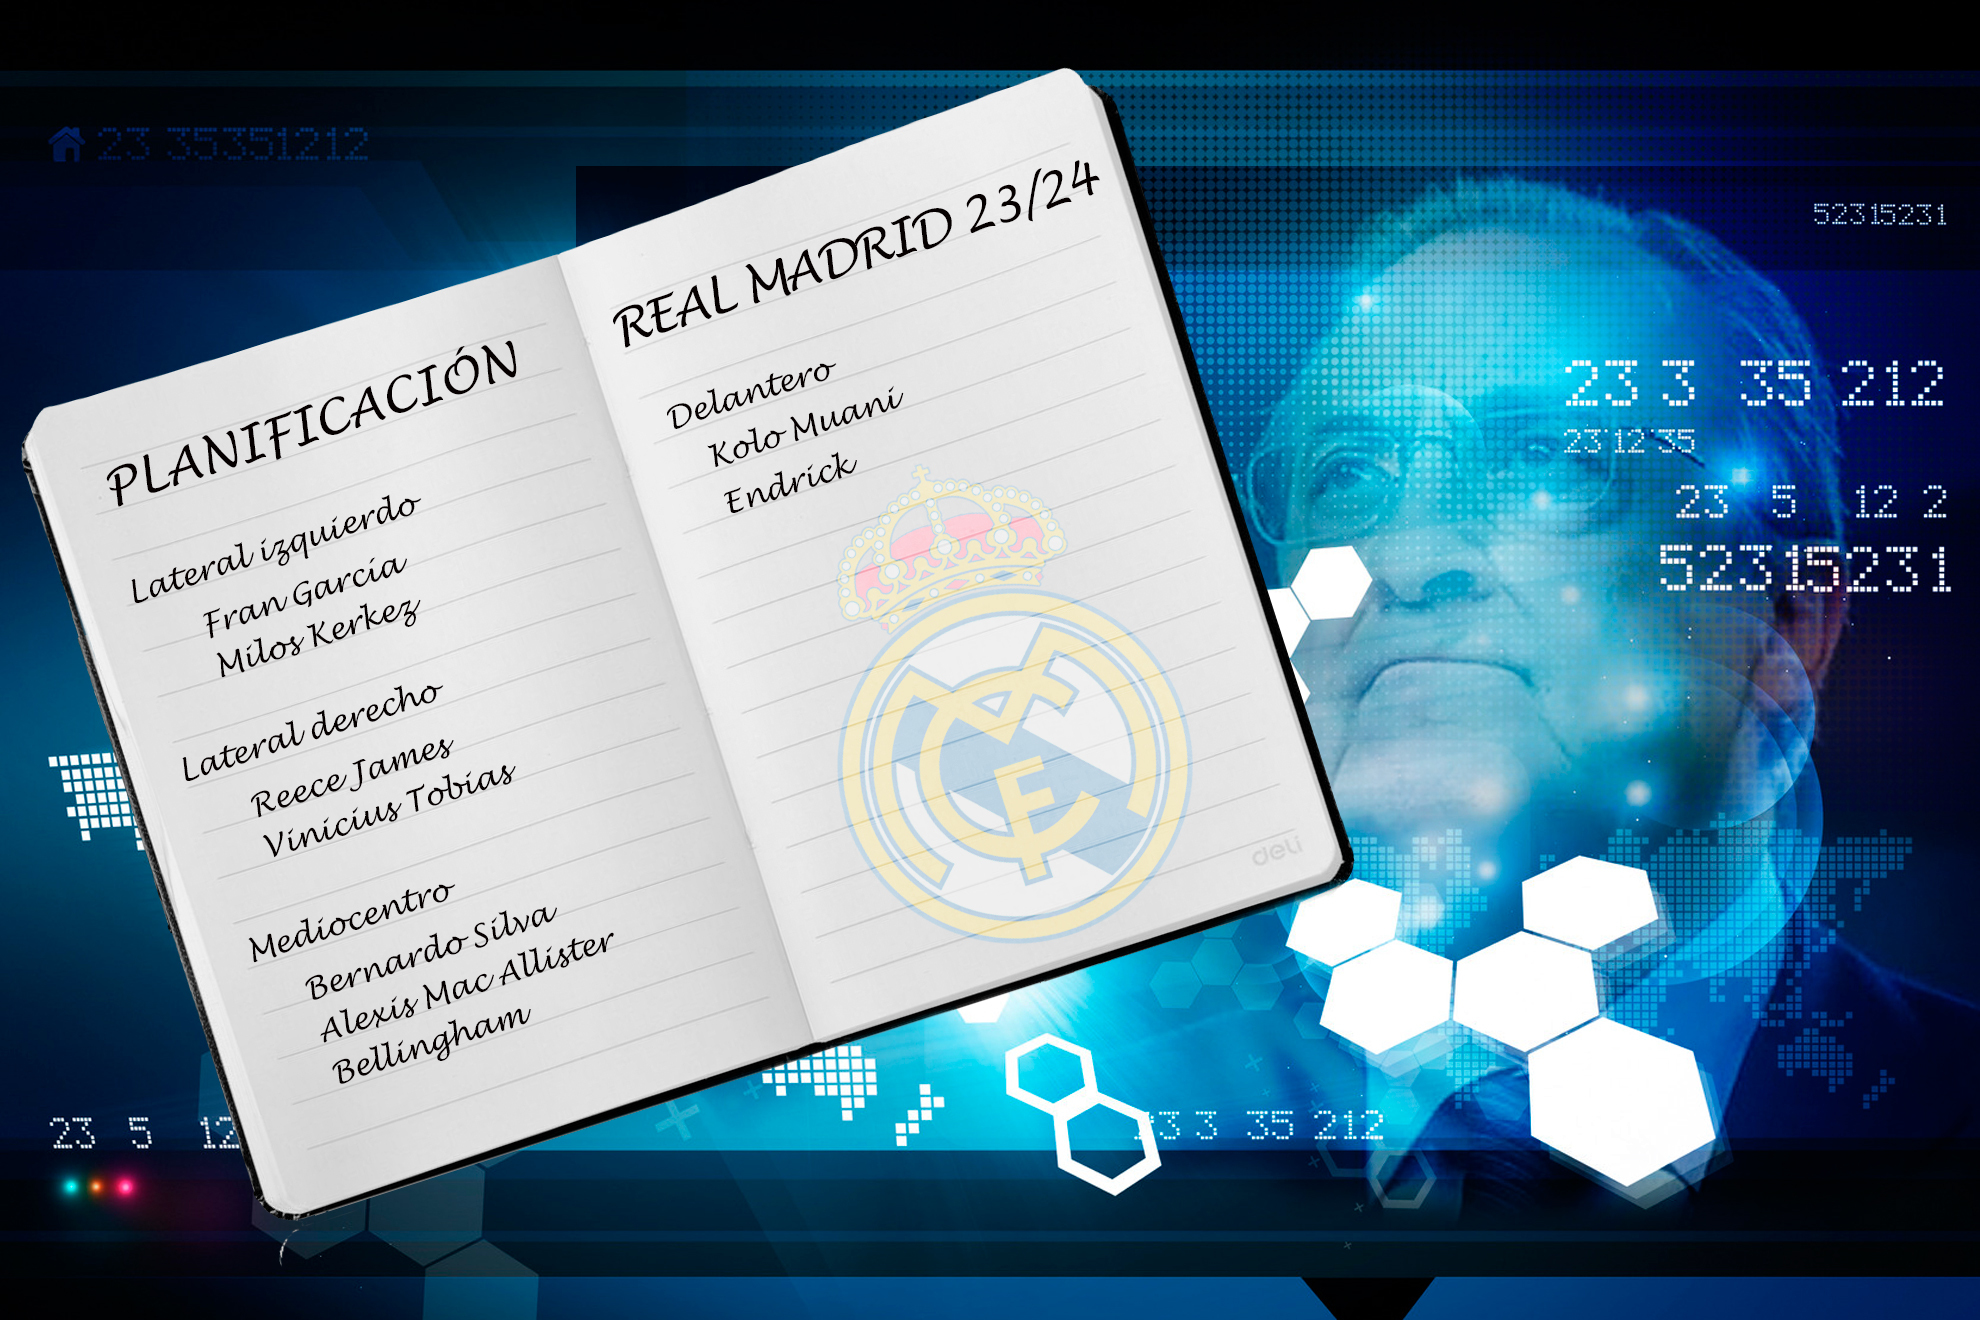 Big Data on Real Madrid's signings for the upcoming transfer window